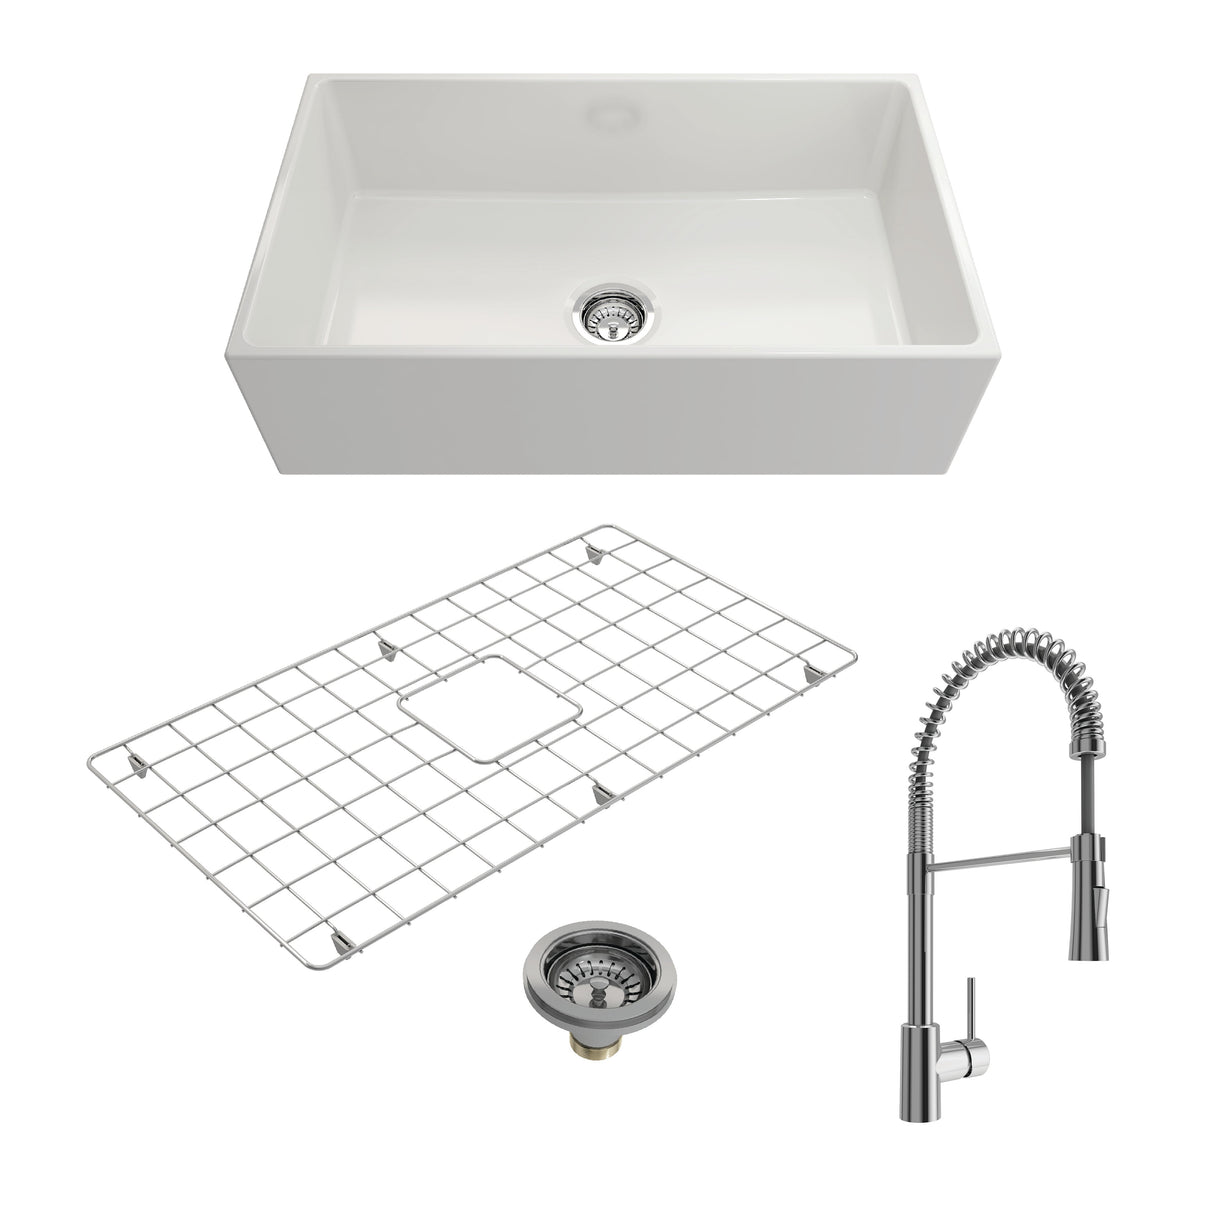 BOCCHI 1352-001-2020CH Kit: 1352 Contempo Apron Front Fireclay 33 in. Single Bowl Kitchen Sink with Protective Bottom Grid and Strainer w/ Livenza 2.0 Faucet